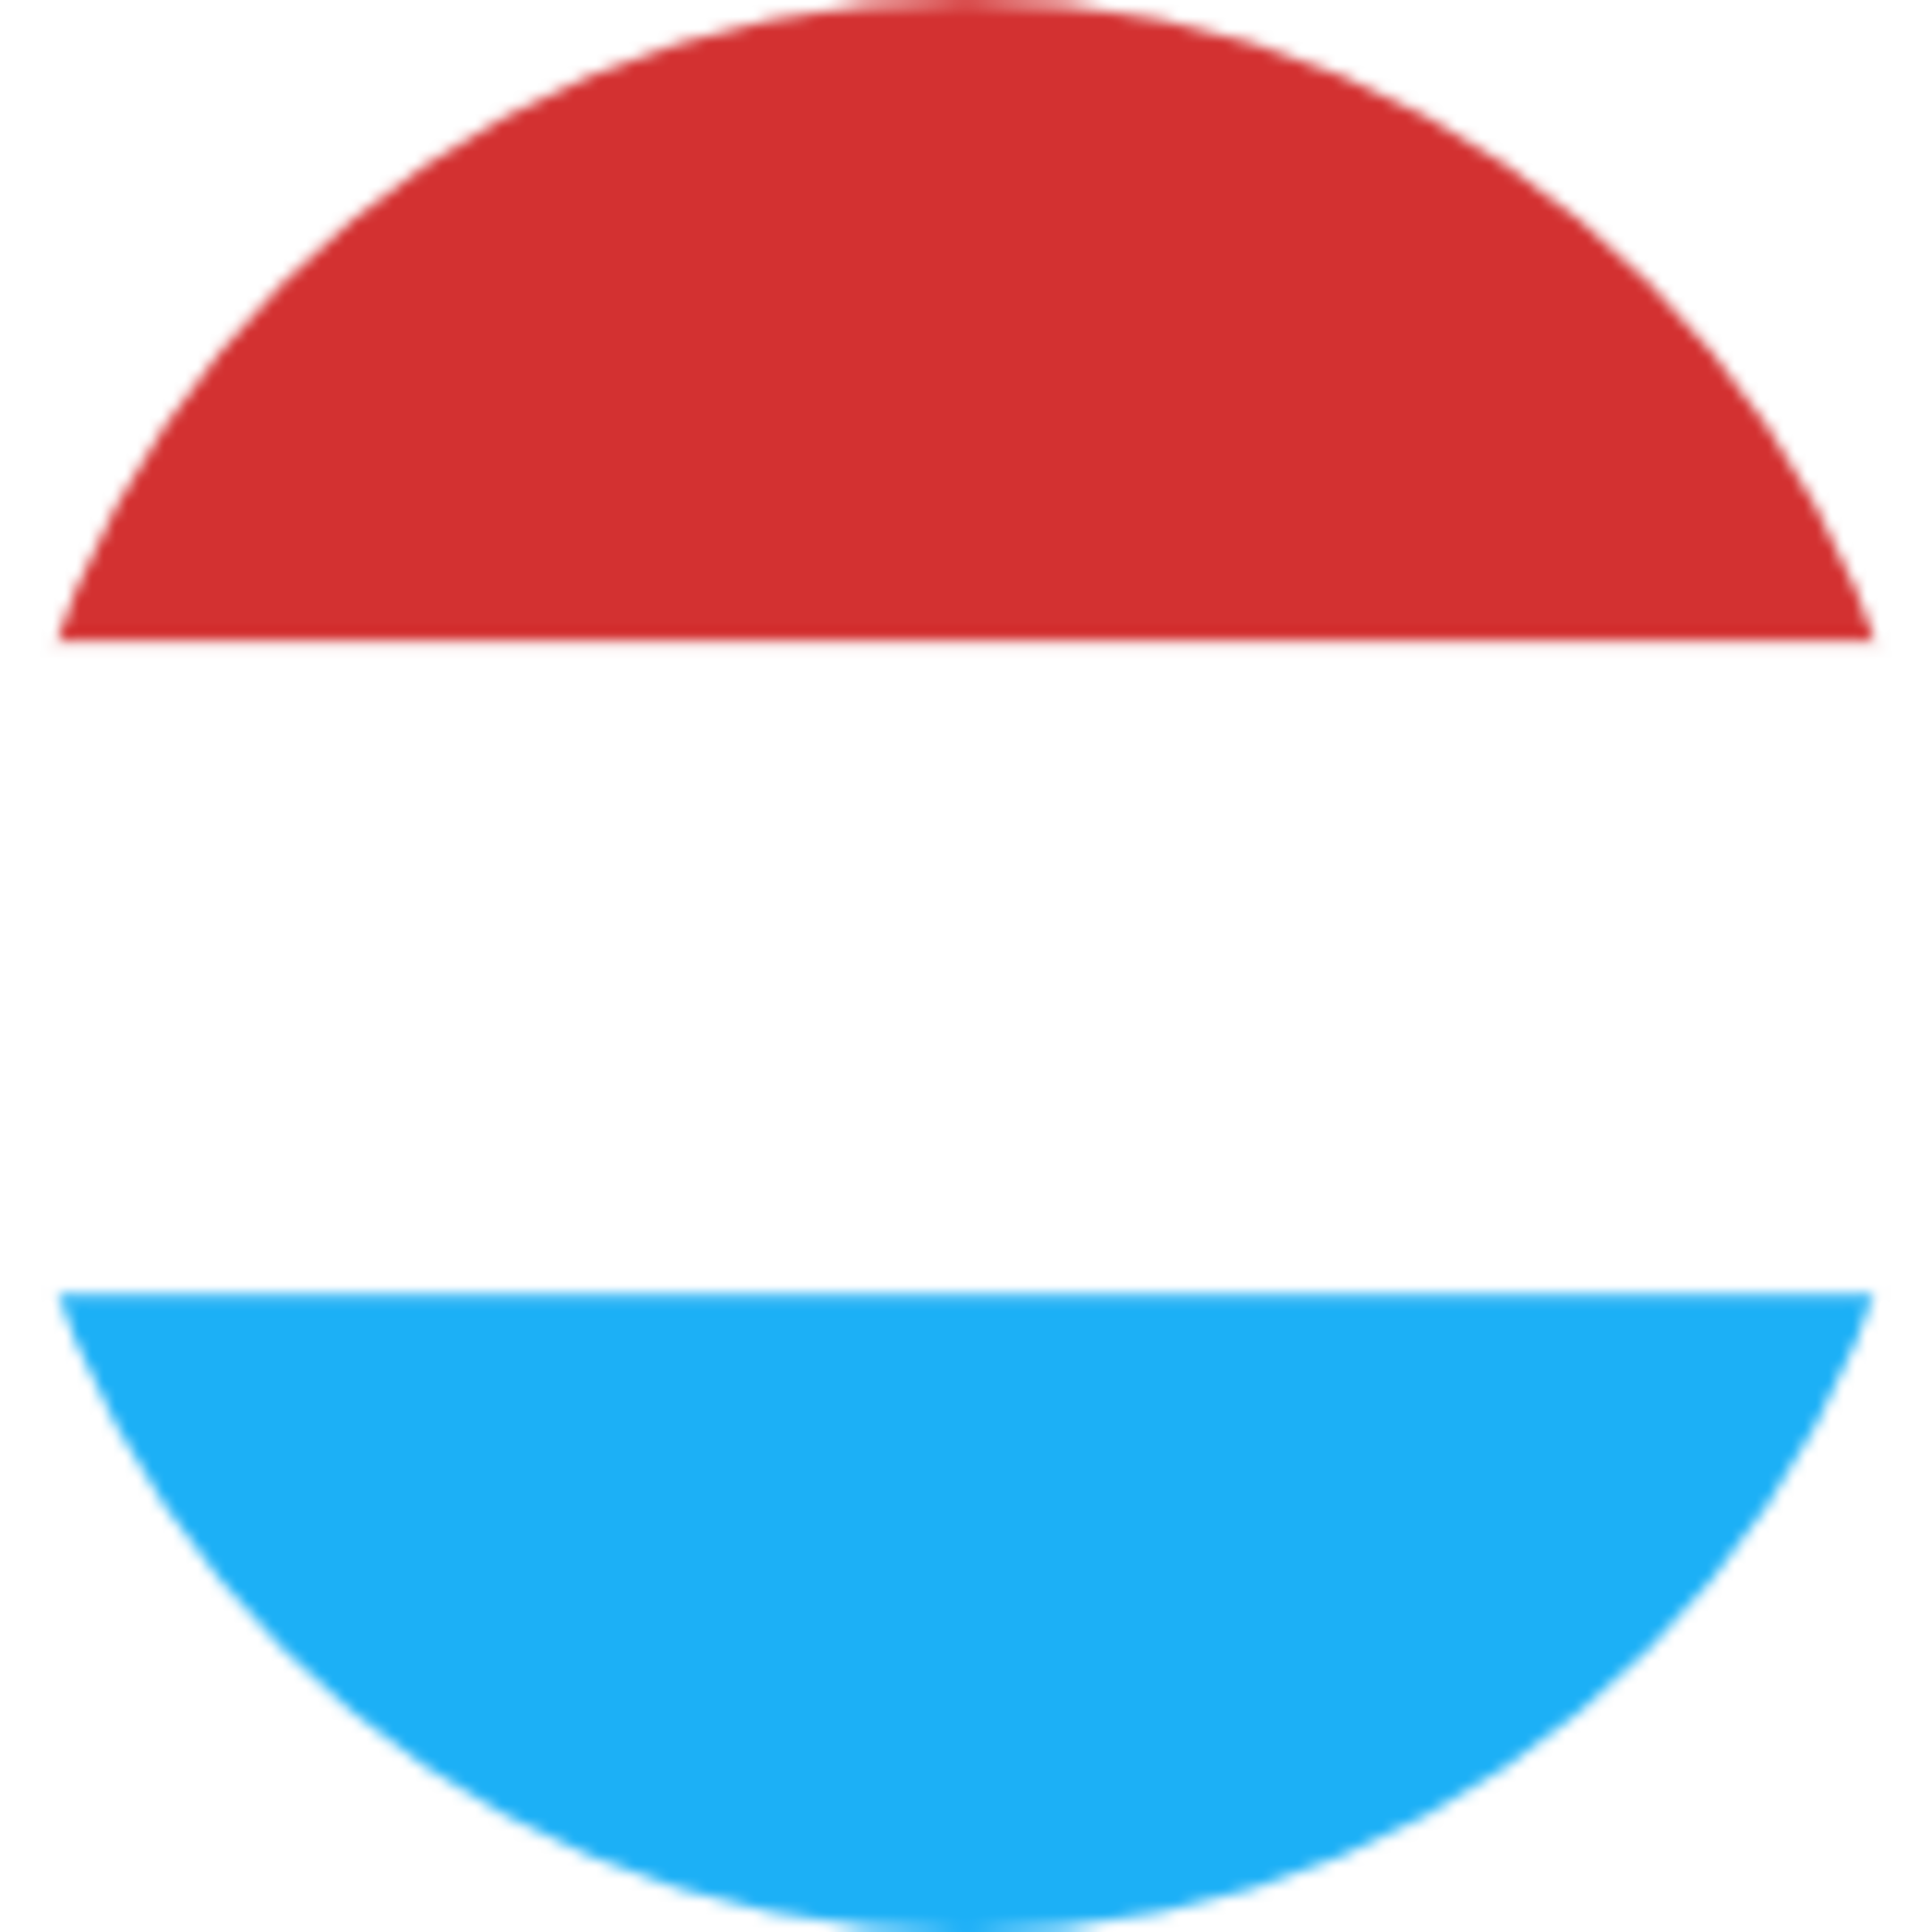 Luxembourg Flag Graphic